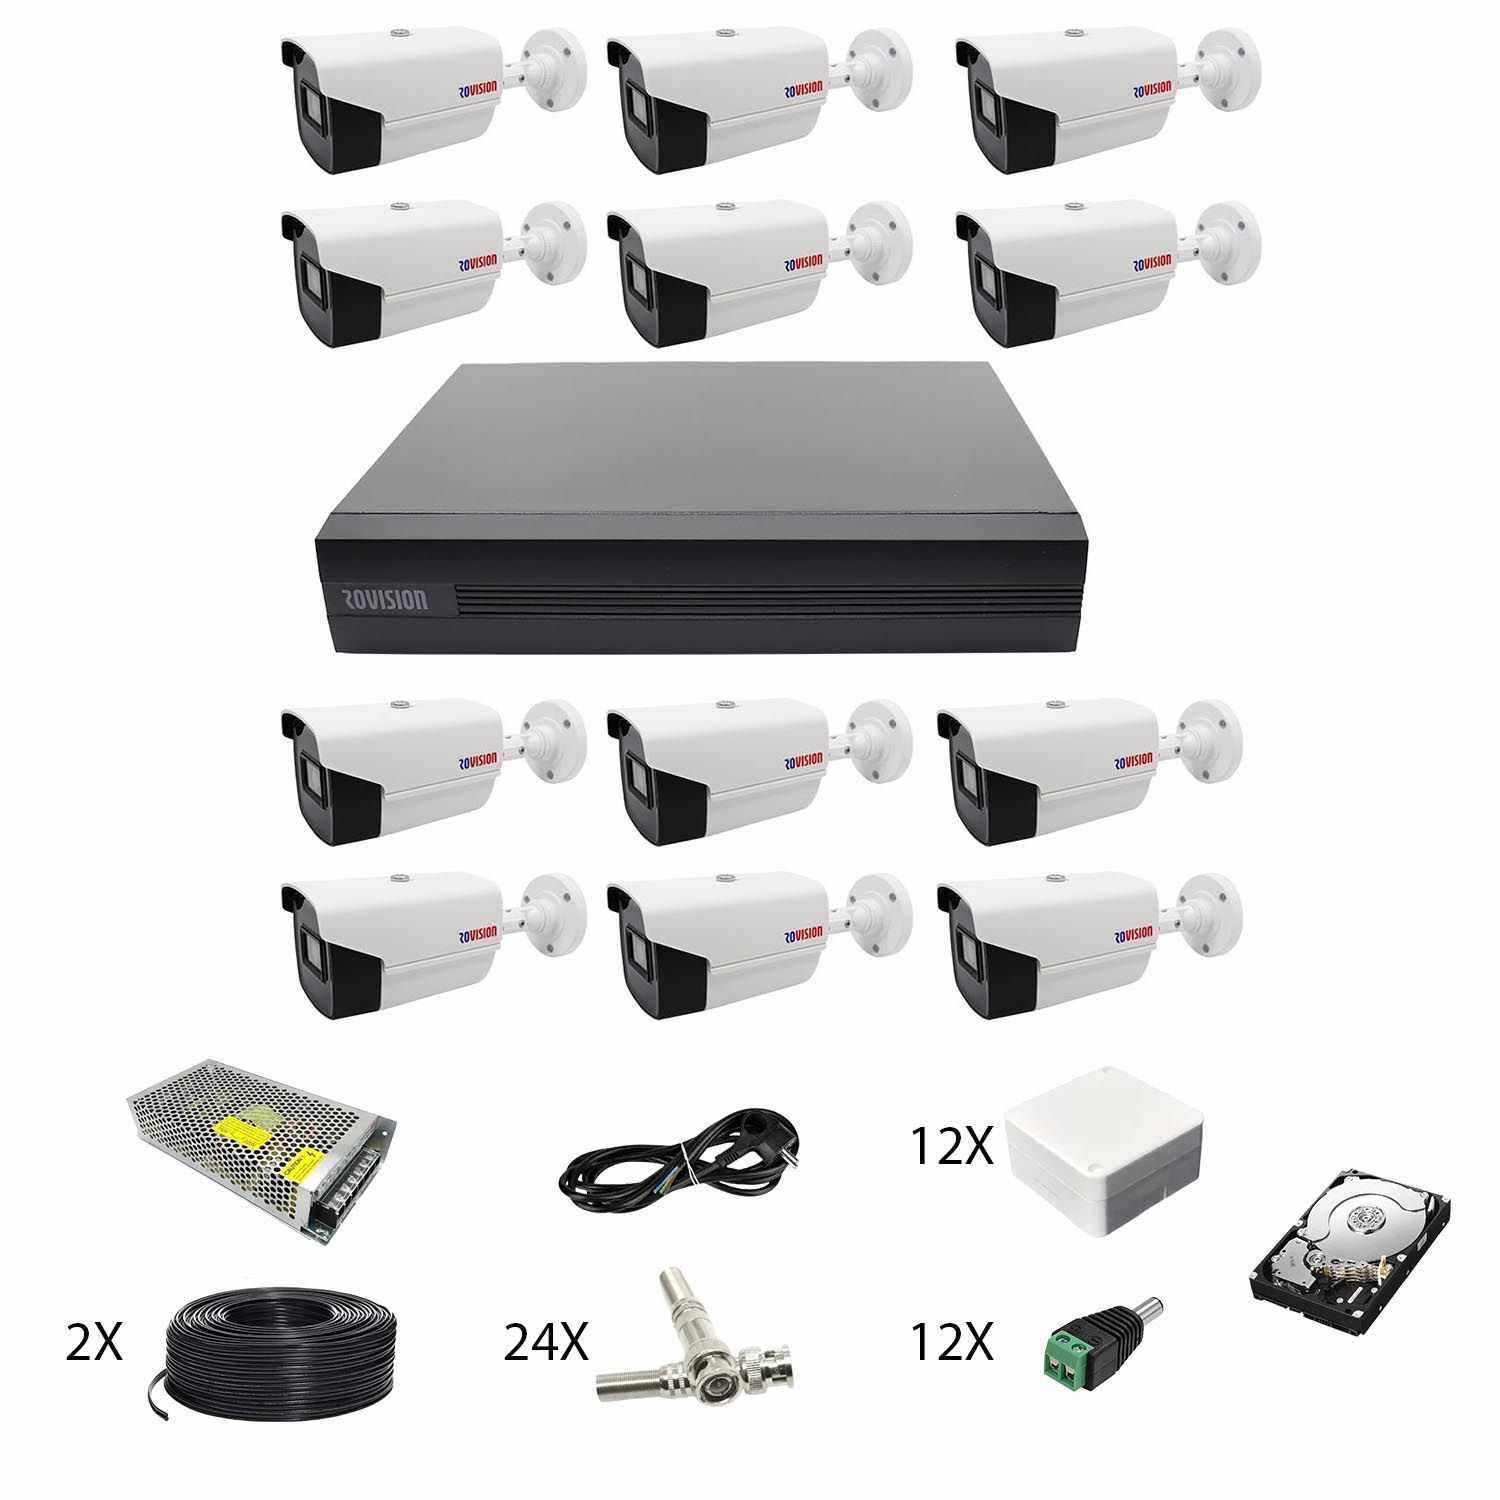 Sistem supraveghere video 12 camere Rovision oem Hikvision 2MP full hd, IR 40m, DVR 16 canale, accesorii si hard disk